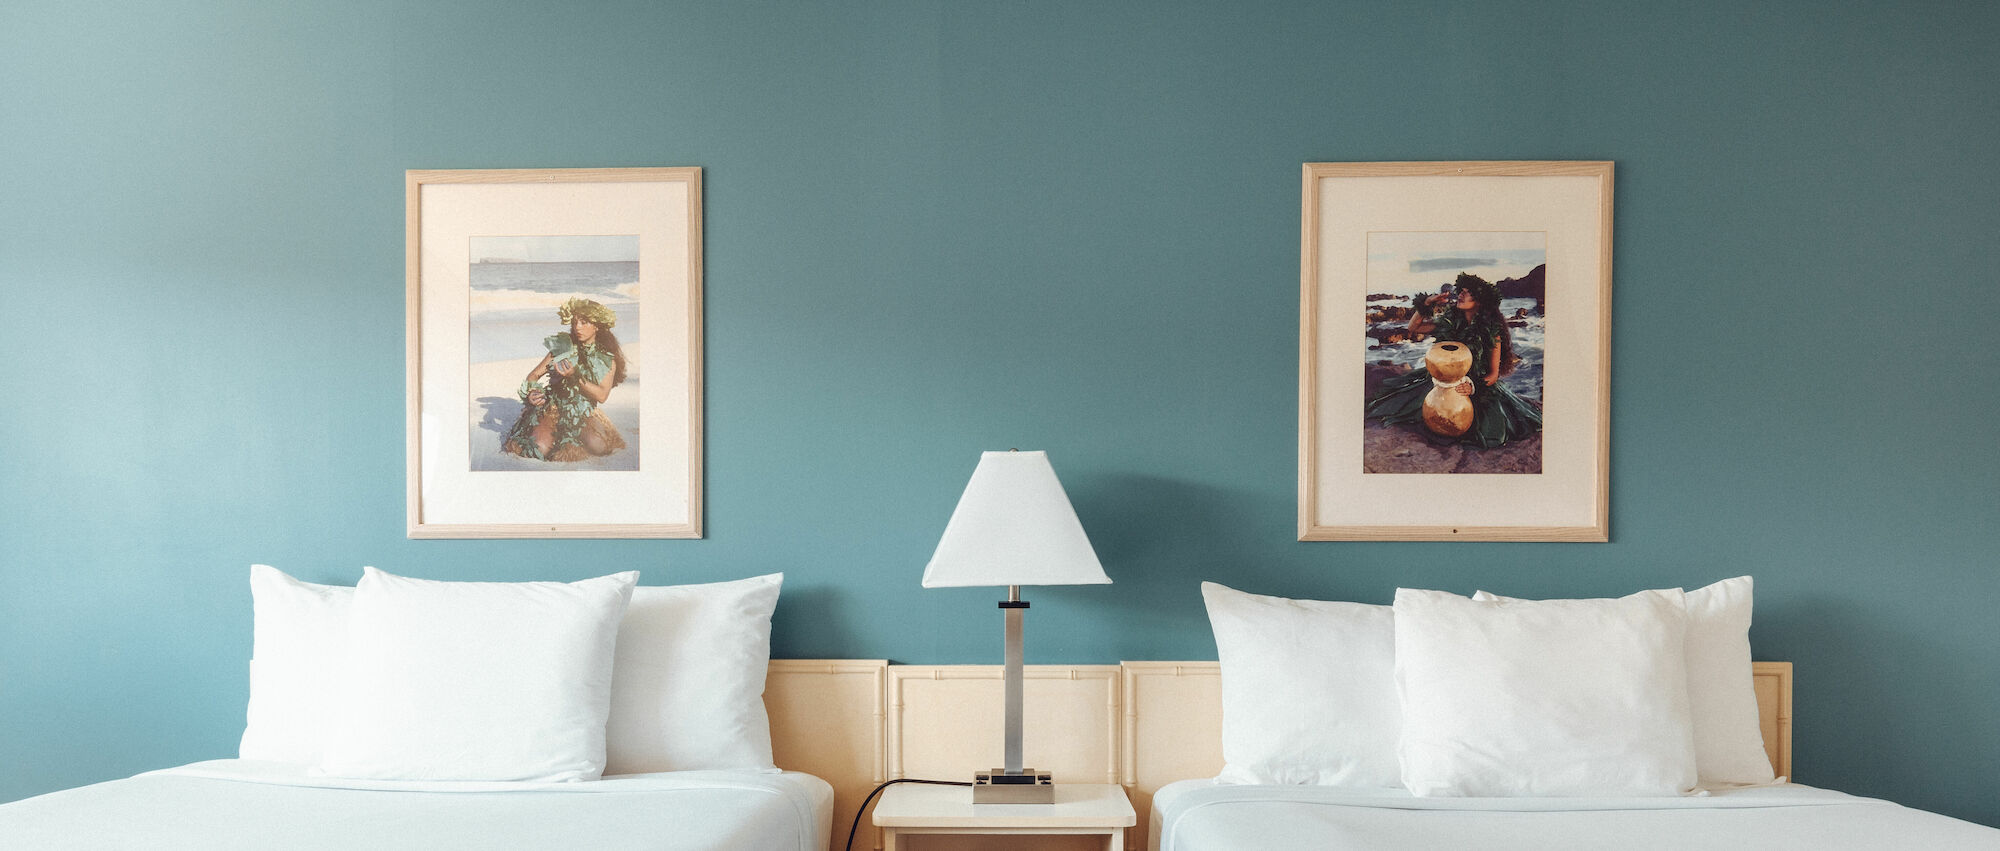 The image shows two twin beds with white bedding, a nightstand with a lamp between them, and two framed pictures above, all set against a teal wall.